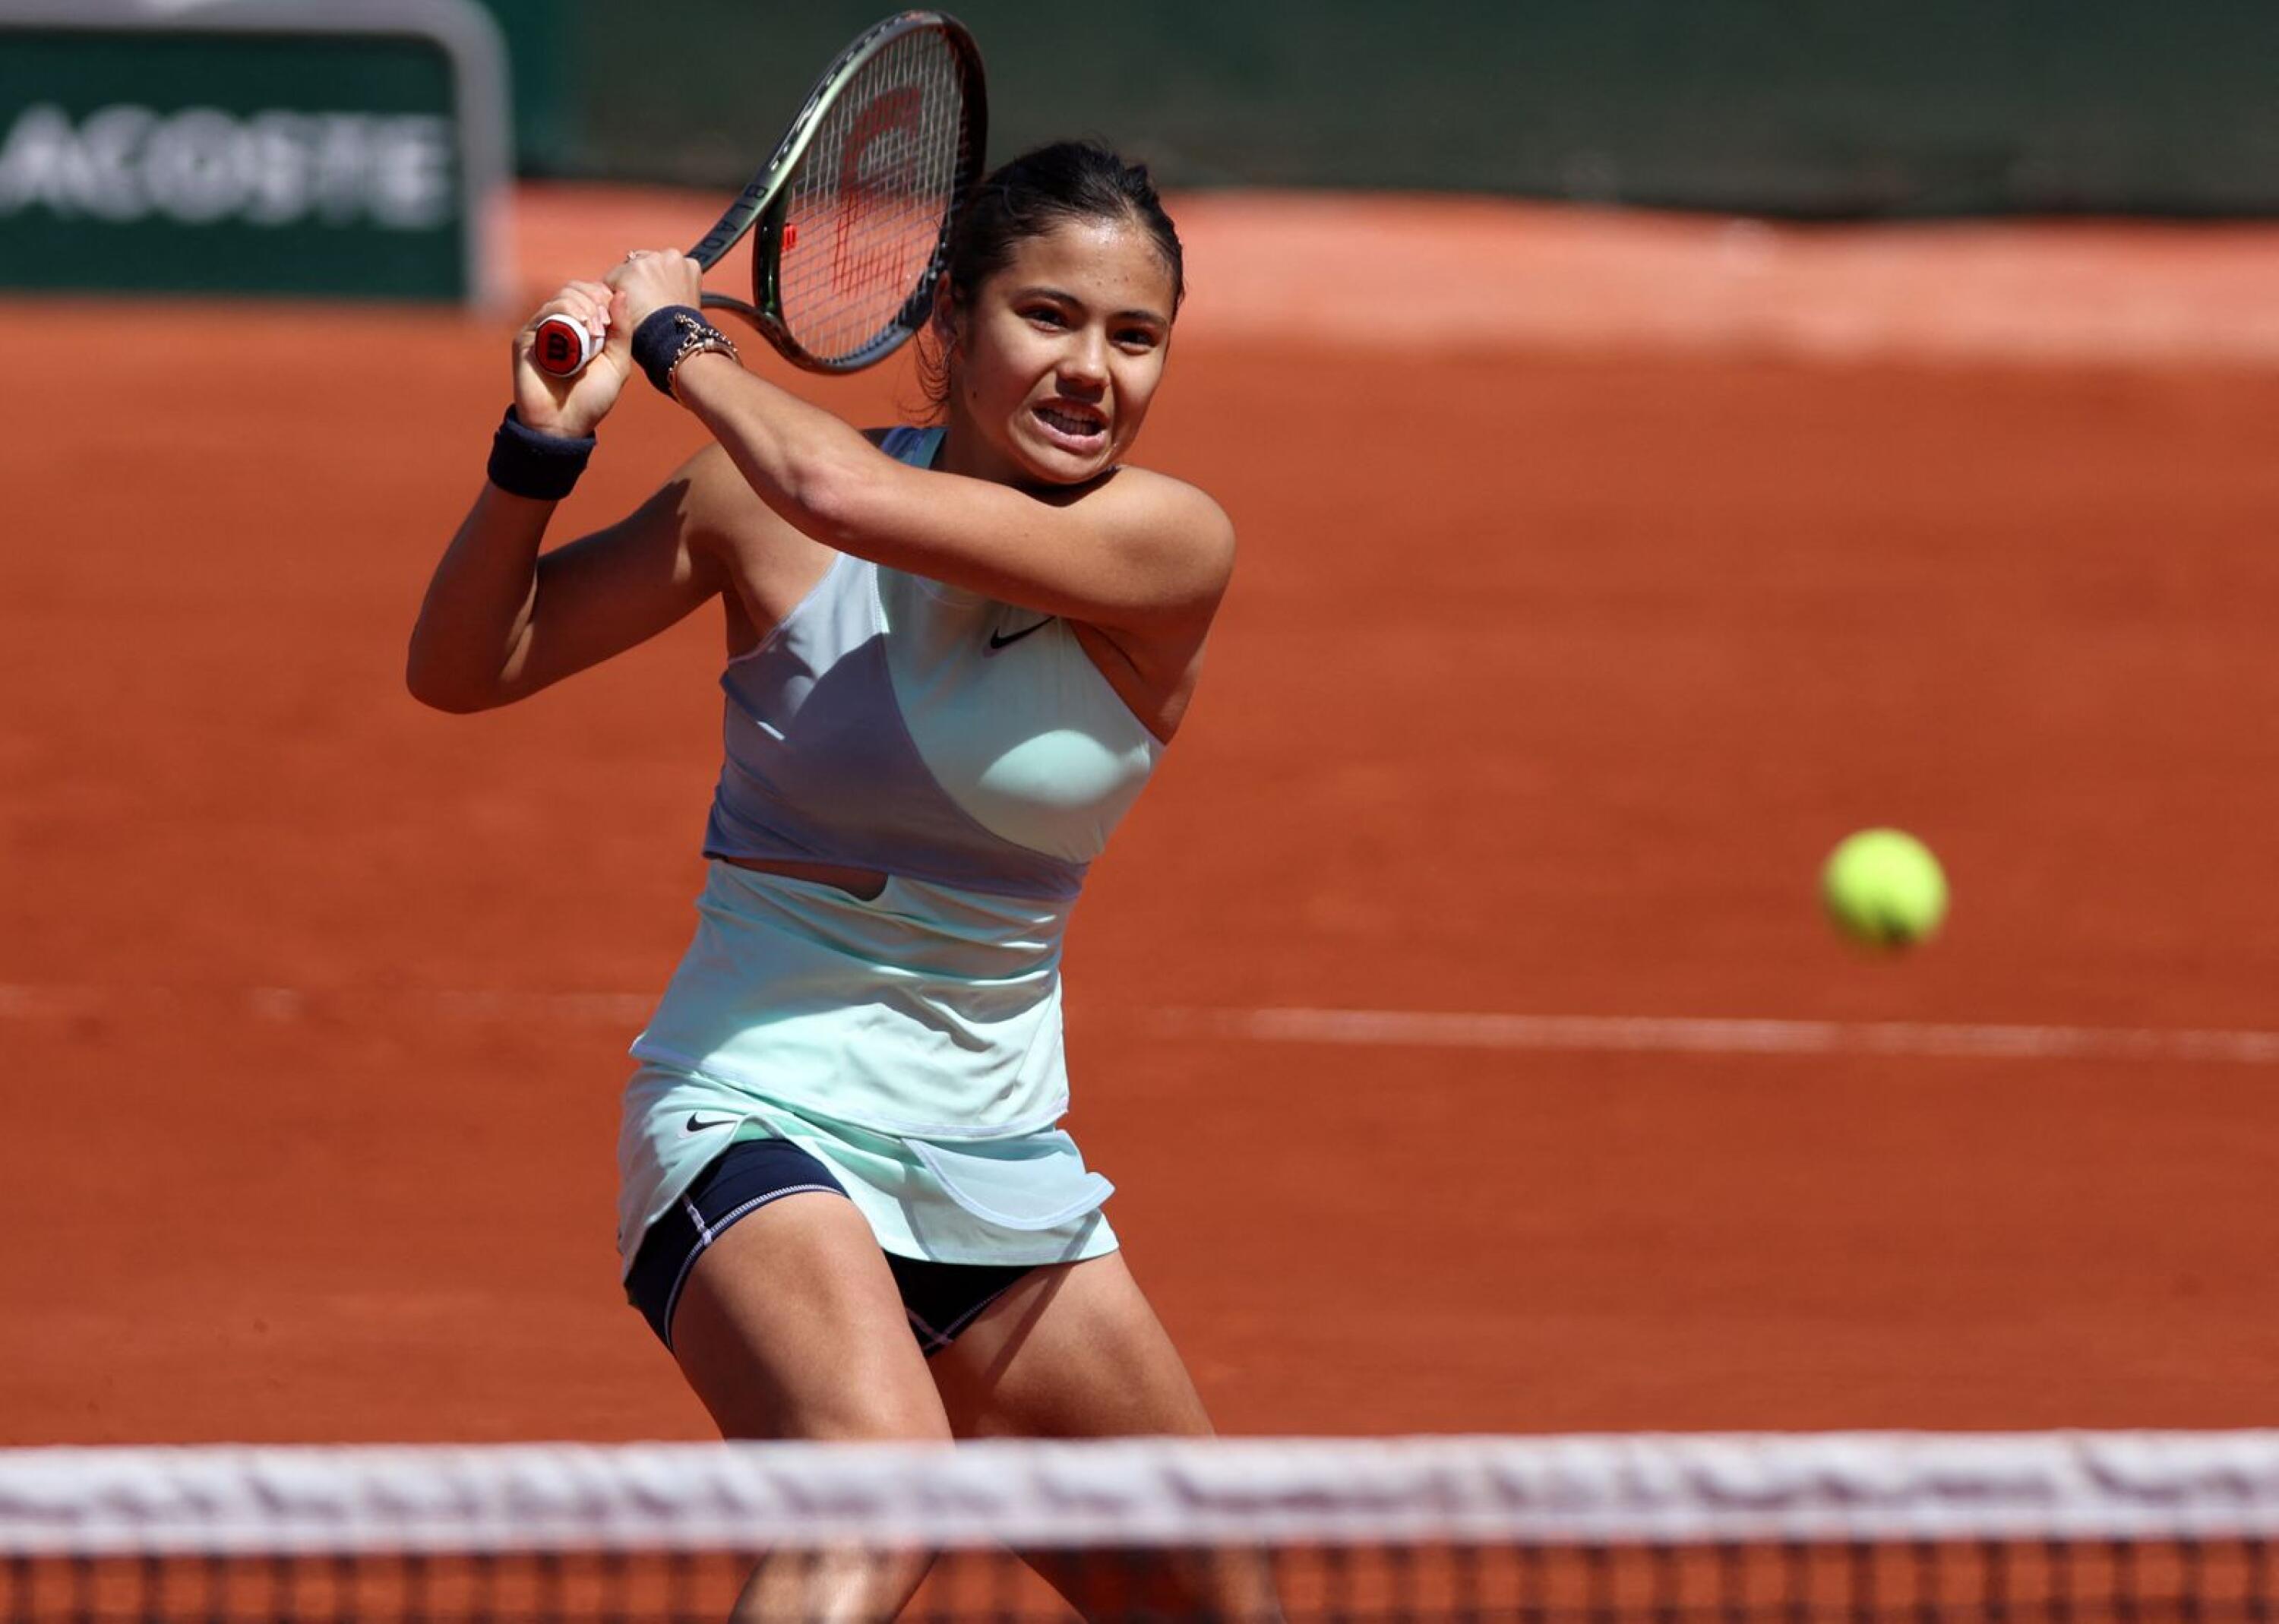 Britain's Emma Raducanu returns the ball to Belarus' Aliaksandra Sasnovich during their women's singles match on day four of the Roland-Garros Open tennis tournament at the Court Suzanne-Lenglen in Paris on Tuesday